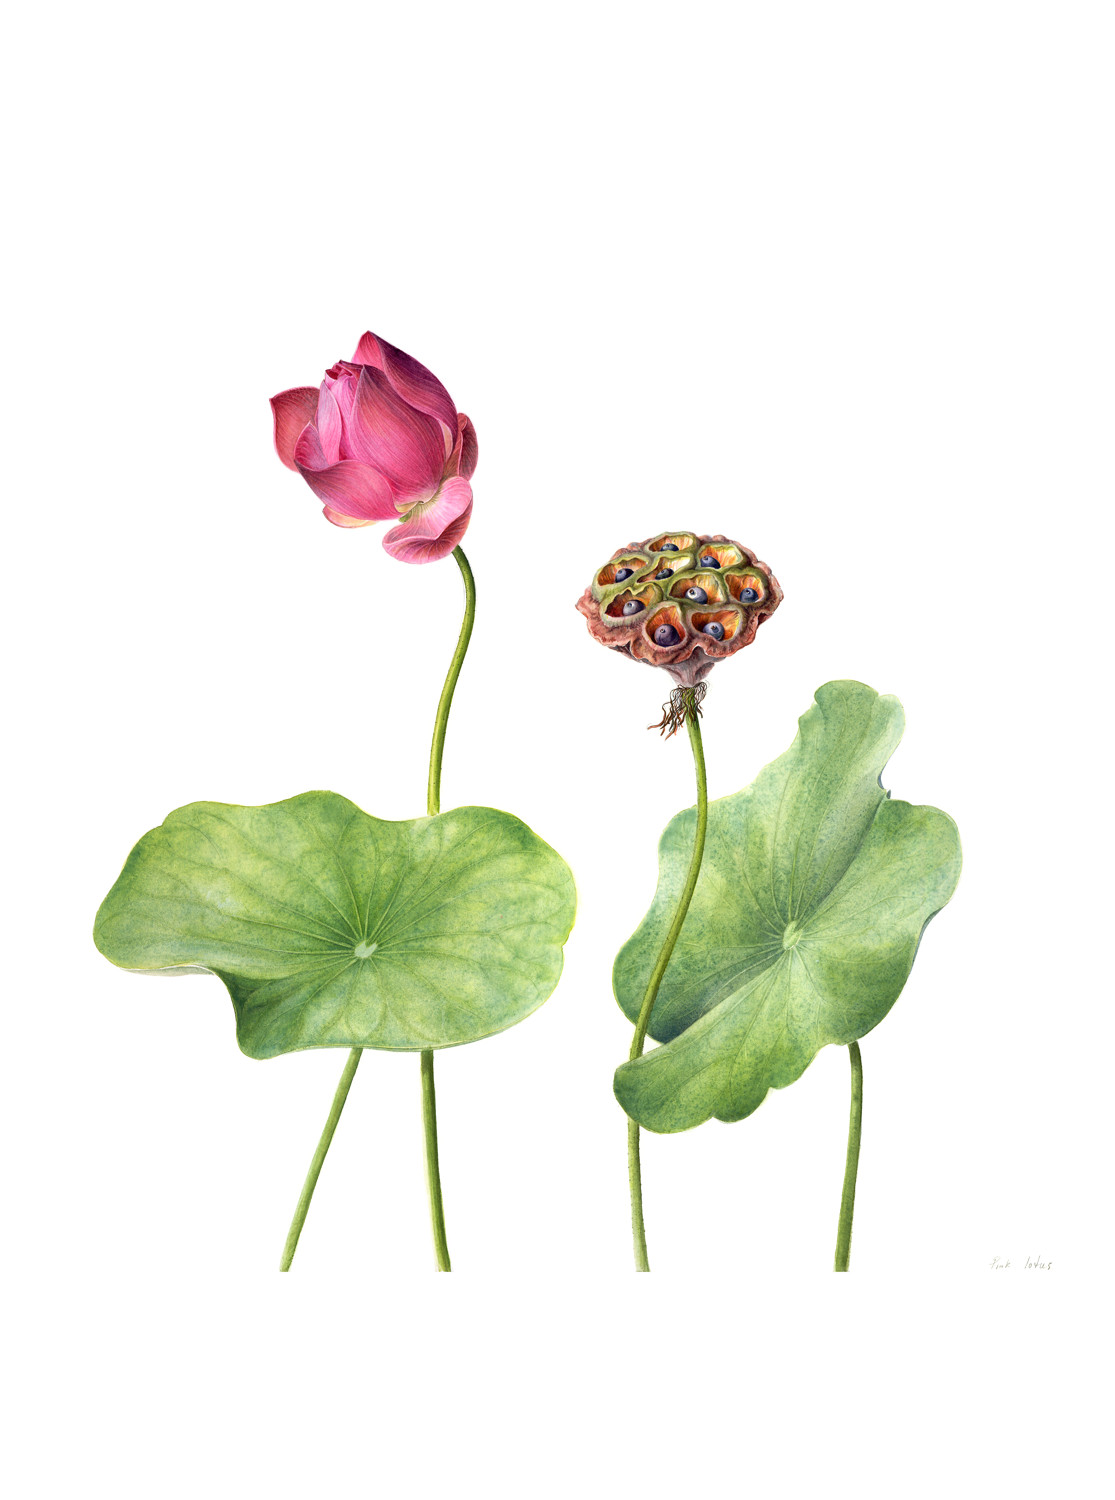 Illustration of Lotus Lily - flower and pod - by Jenny Phillips